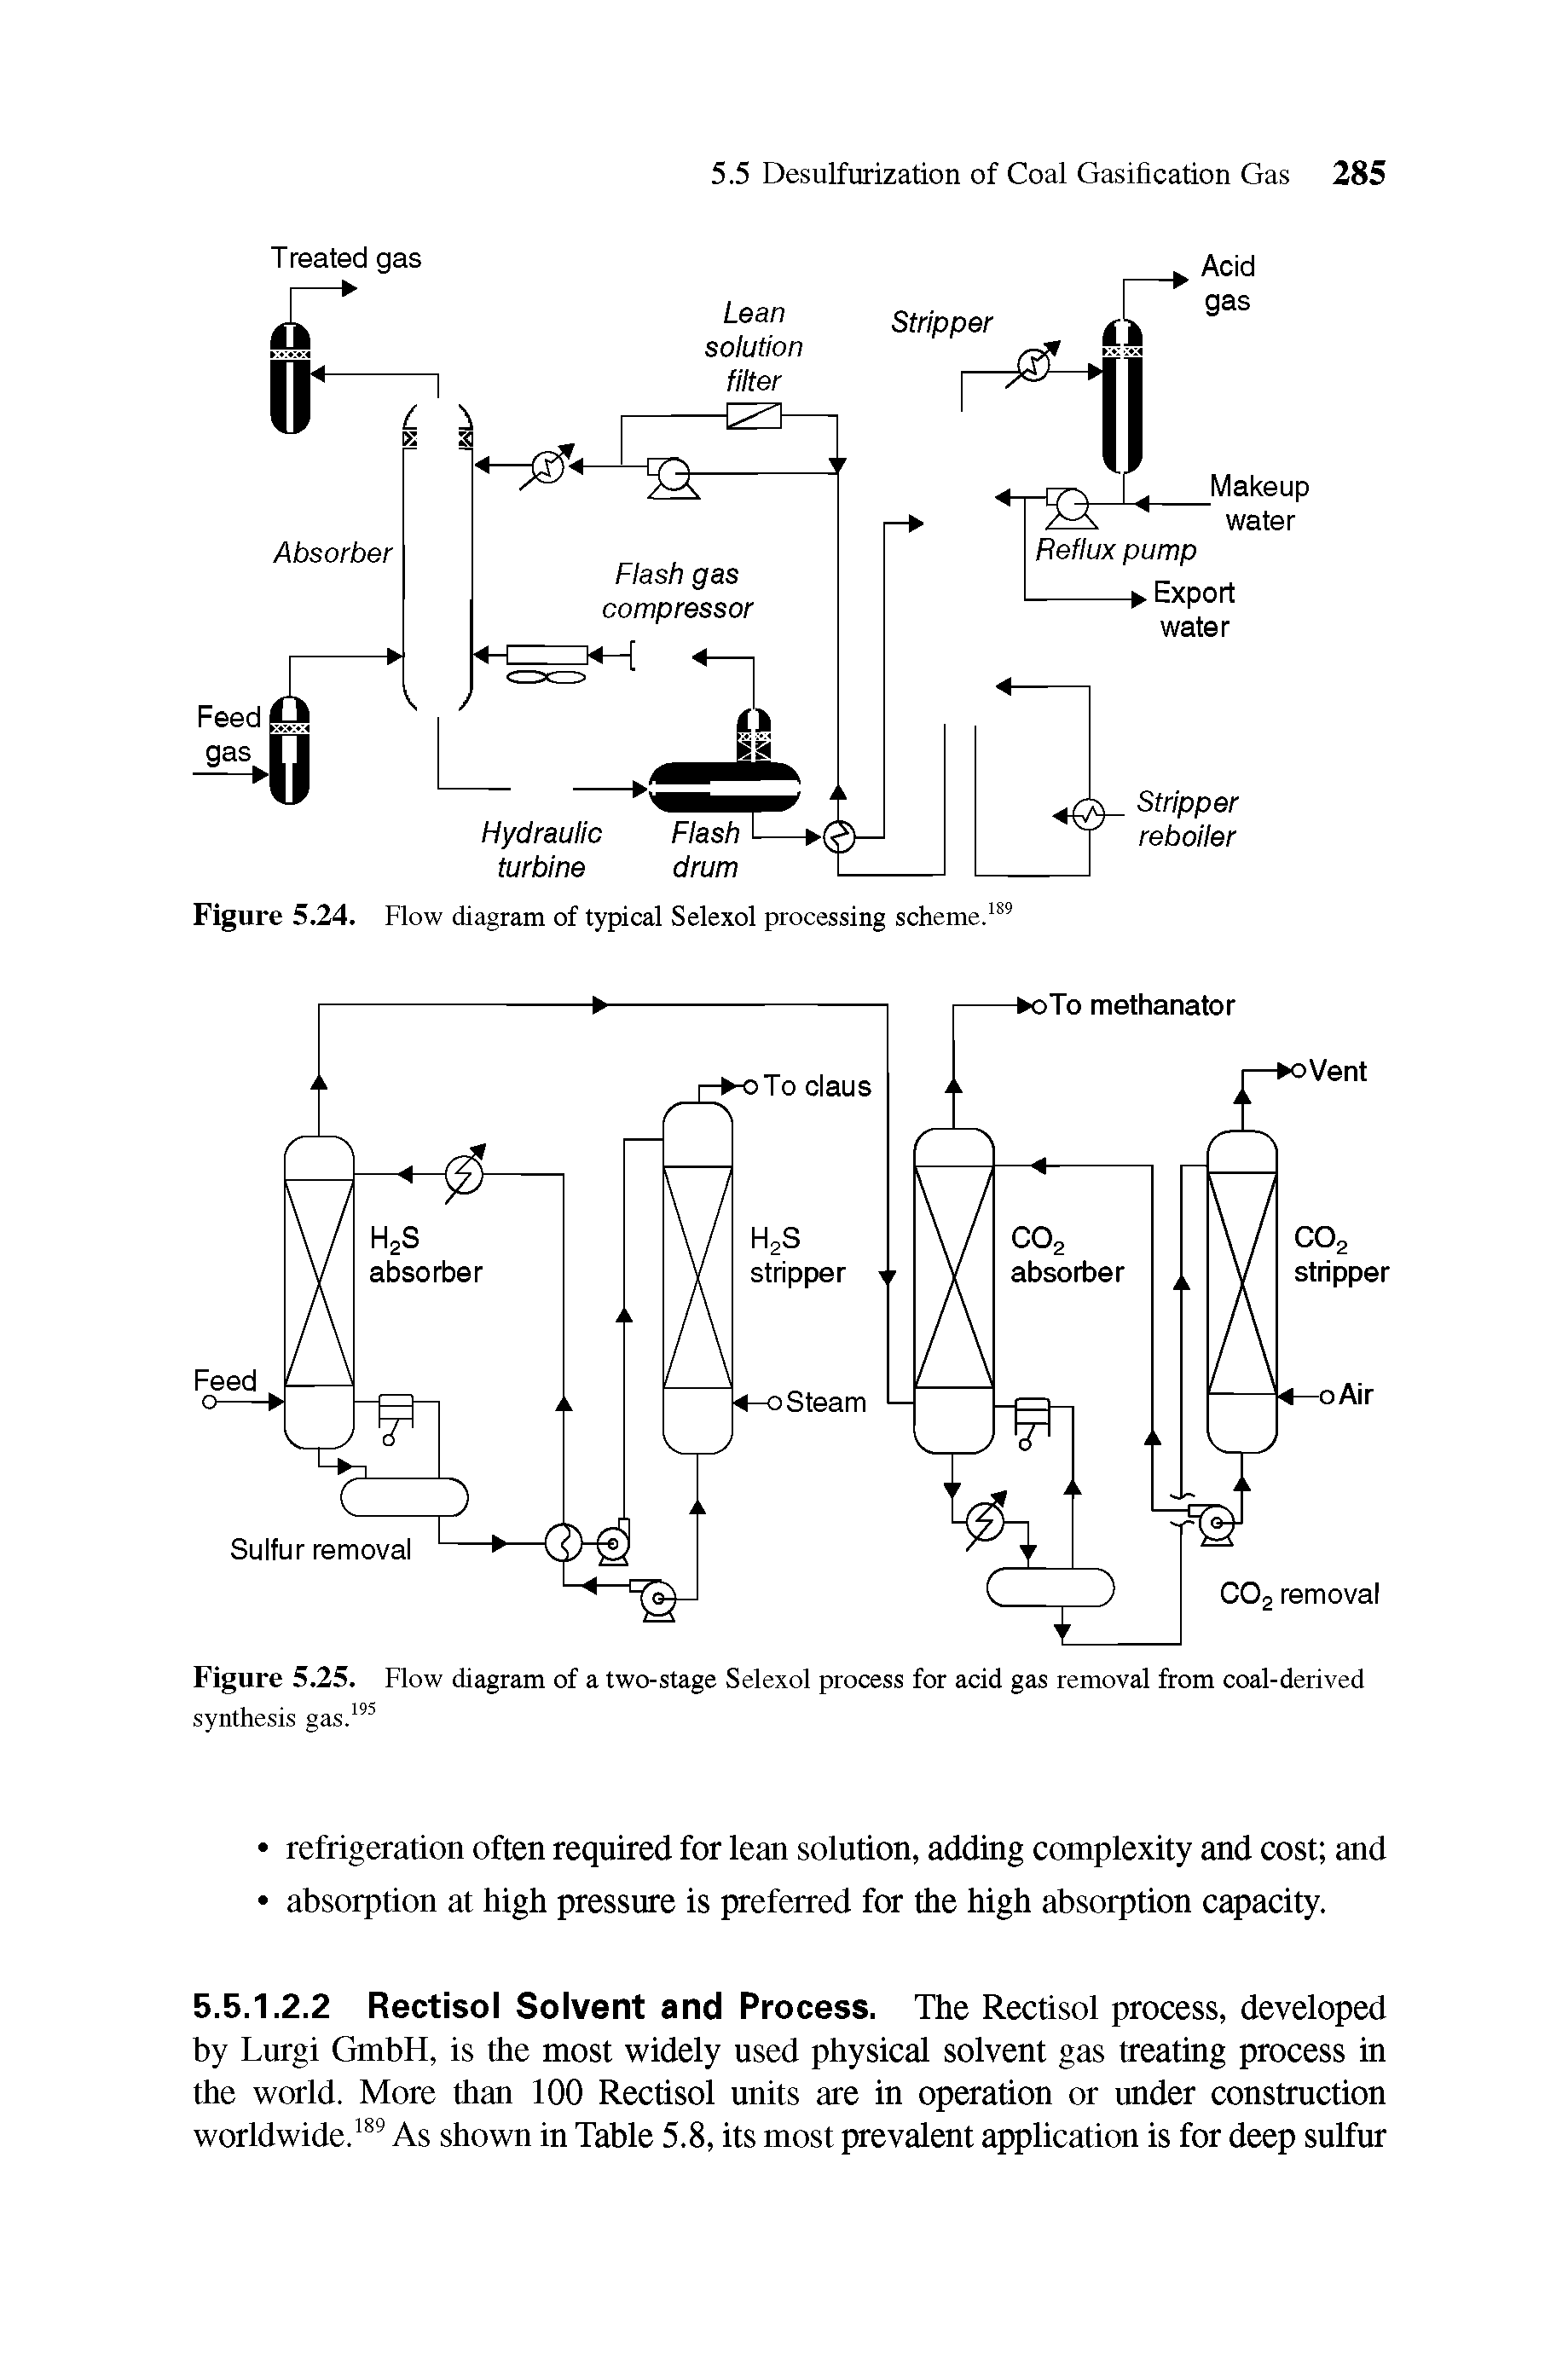 Figure 5.25. Flow diagram of a two-stage Selexol process for acid gas removal from coal-derived...